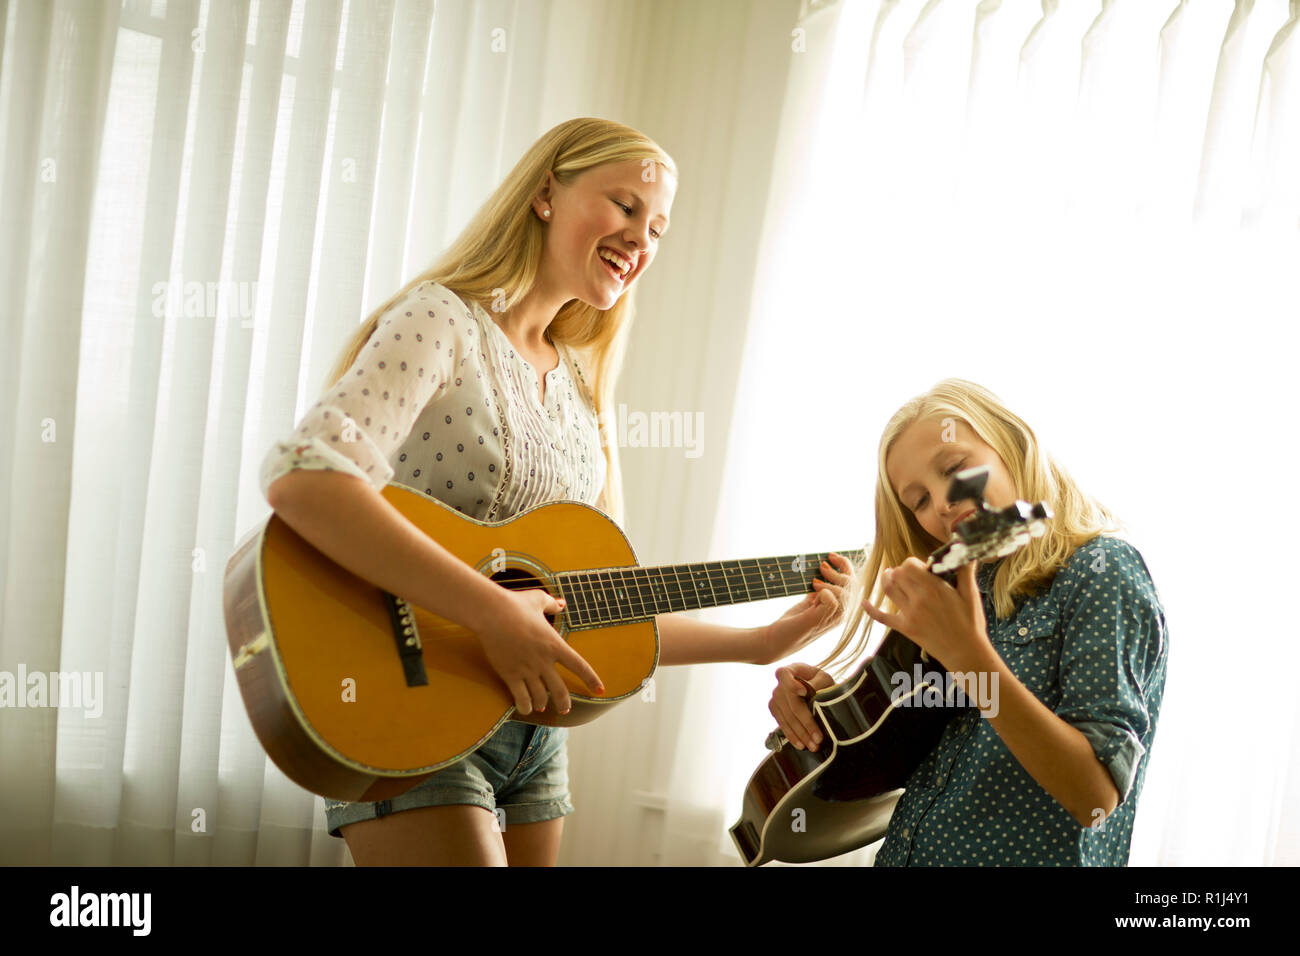 Happy teenage girls playing guitar together. Stock Photo